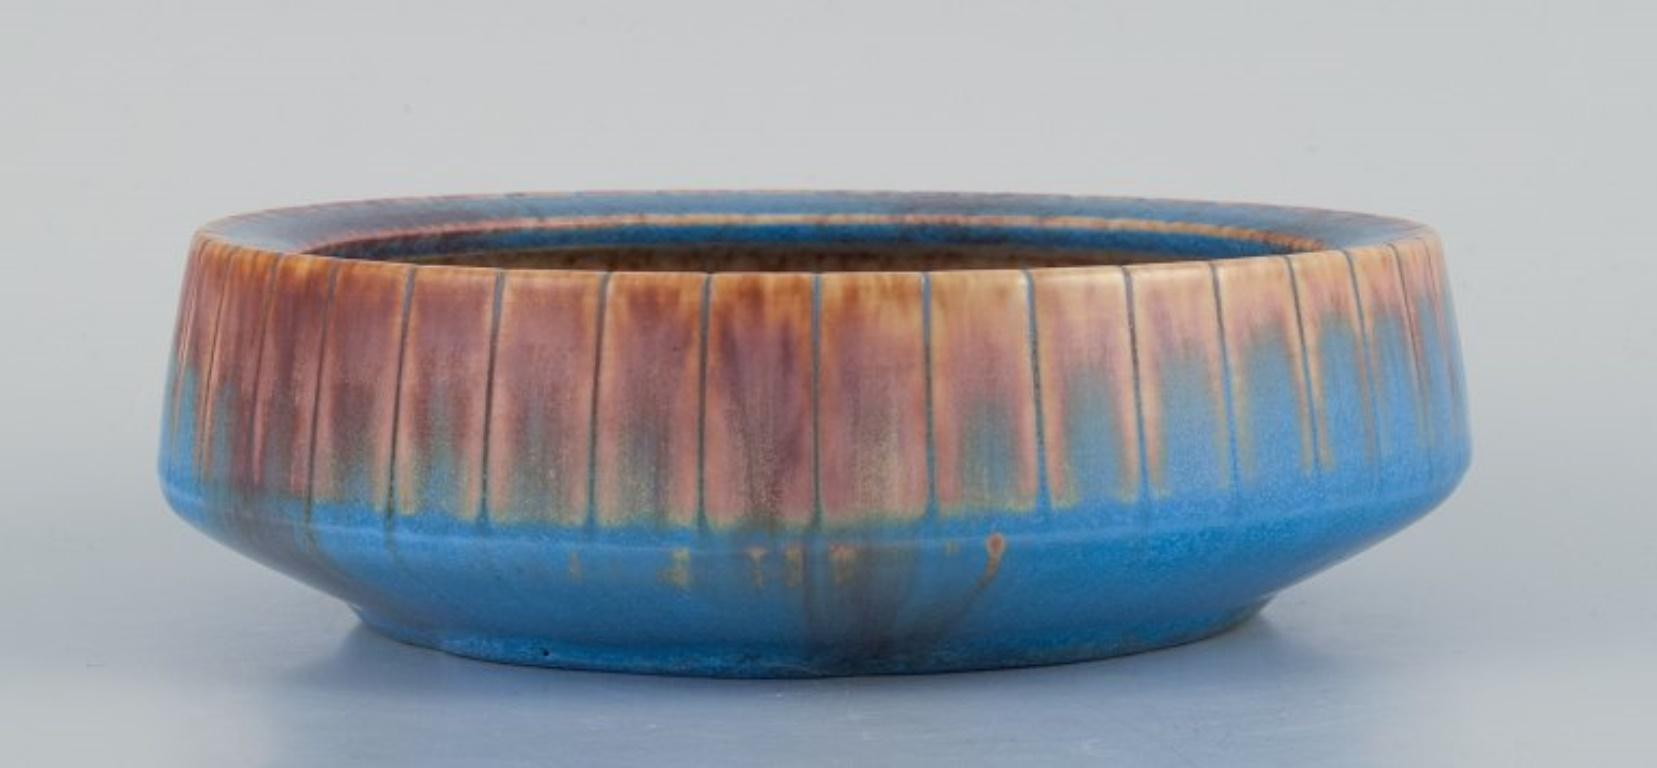 Gunnar Nylund for Rörstrand. 
Ceramic bowl with glaze in blue and brown tones.
Mid-20th century.
Marked.
In excellent condition.
Second factory quality.
Dimensions: Diameter 17 cm, Height 5.0 cm.